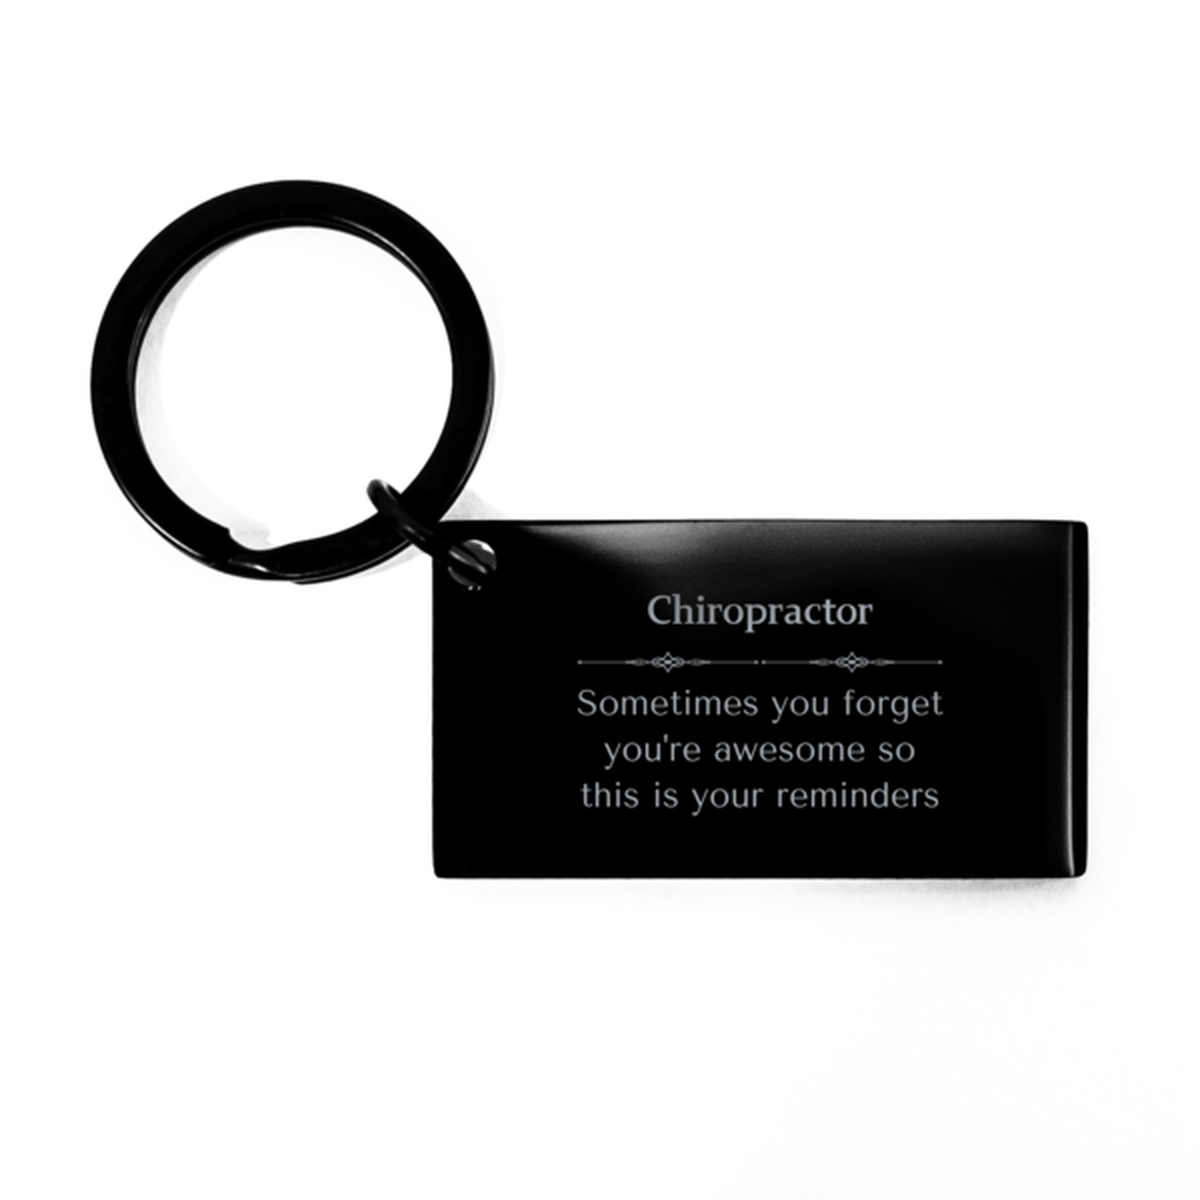 Sentimental Chiropractor Keychain, Dispatcher Sometimes you forget you're awesome so this is your reminders, Graduation Christmas Birthday Gifts for Chiropractor, Men, Women, Coworkers